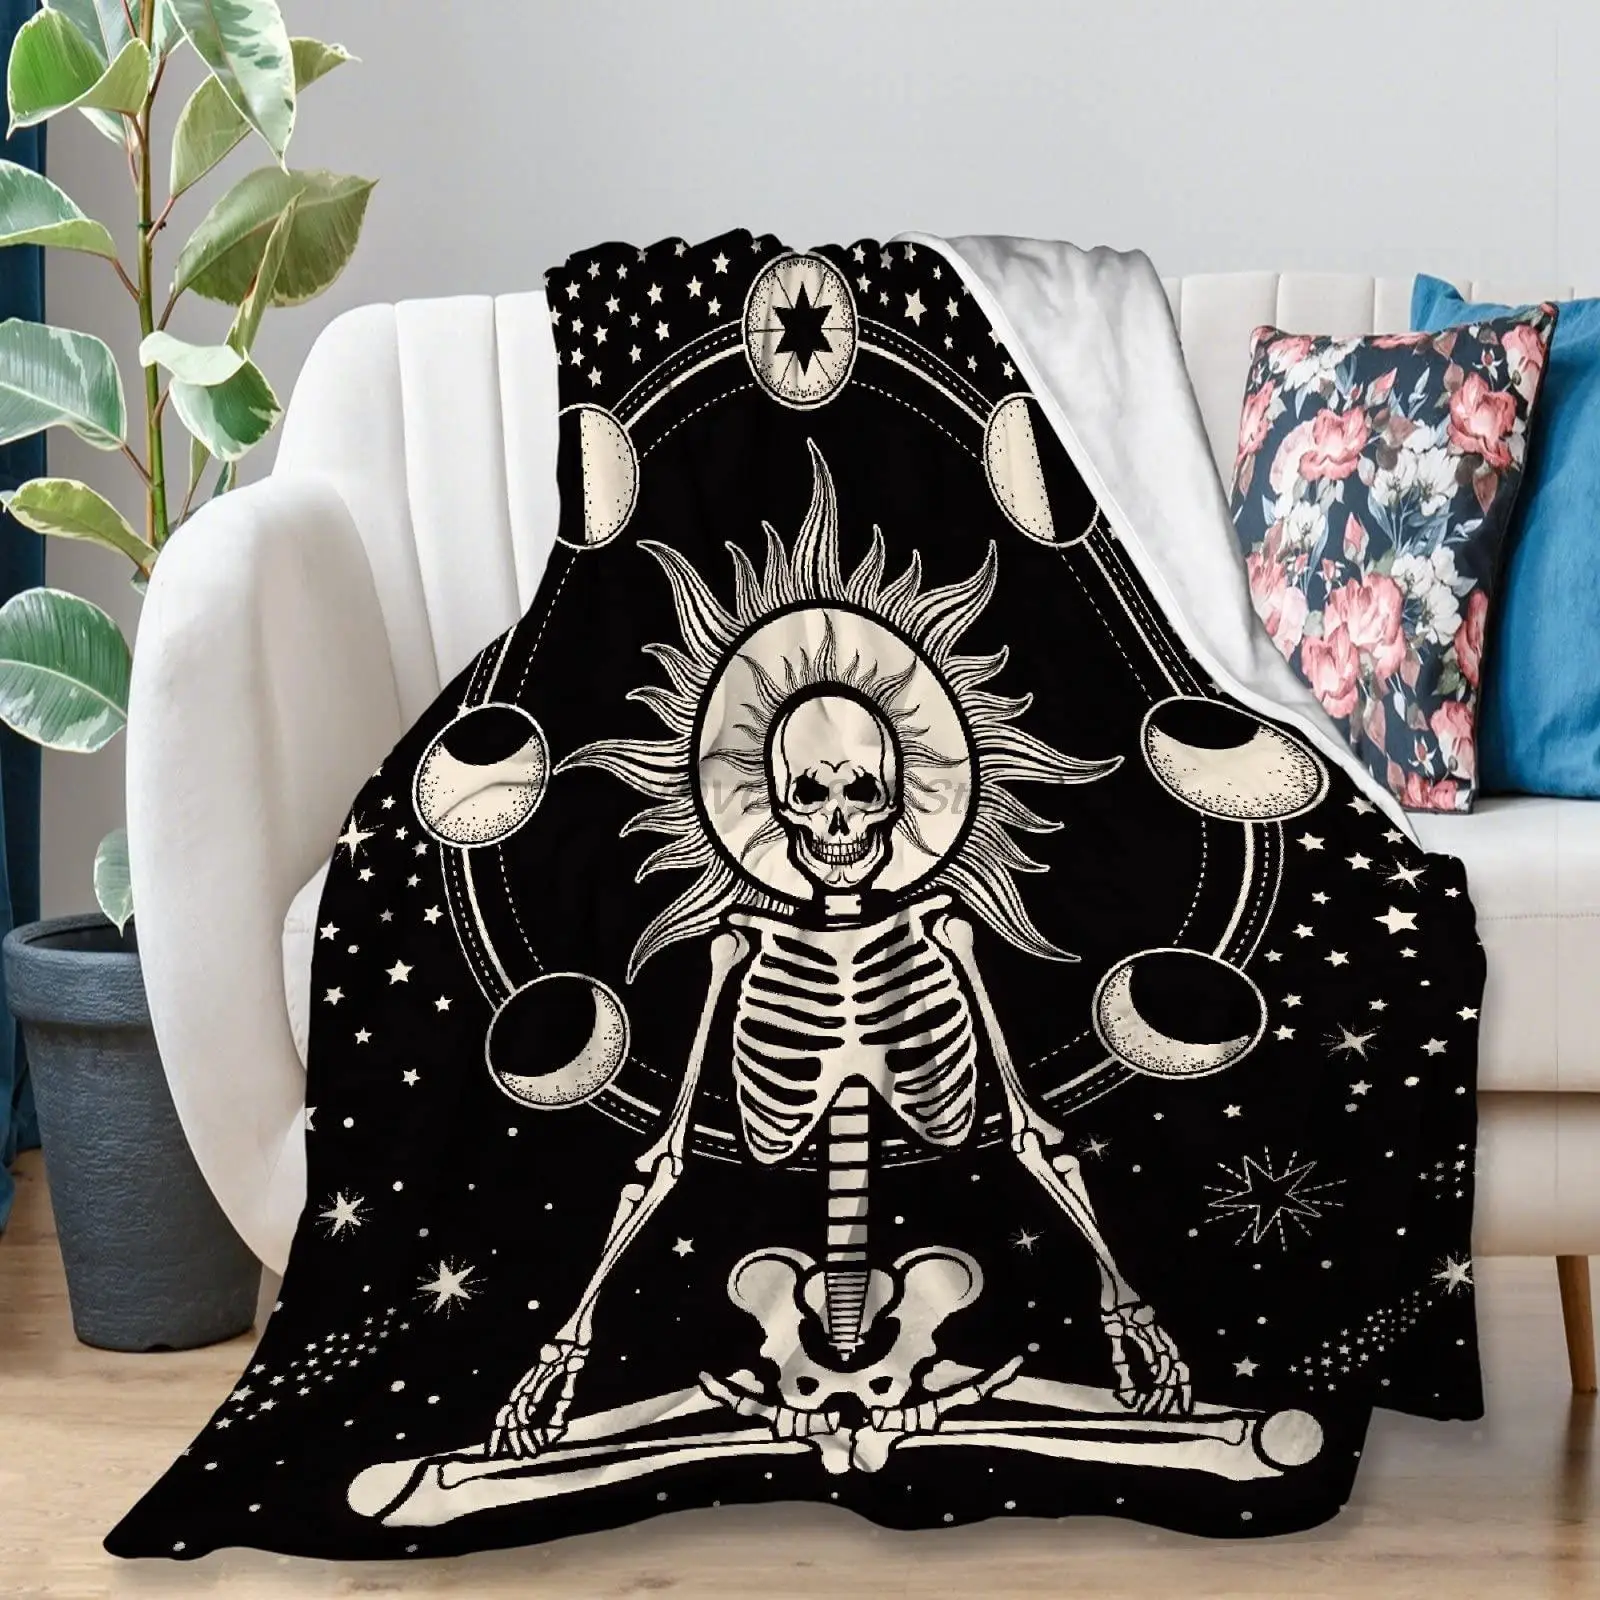 

Yaoola Skull Skeleton Flannel Blanket, All Season Soft Cozy Plush Bed Throw fit Bedroom Living Room Sofa Couch Bedding Office Ci